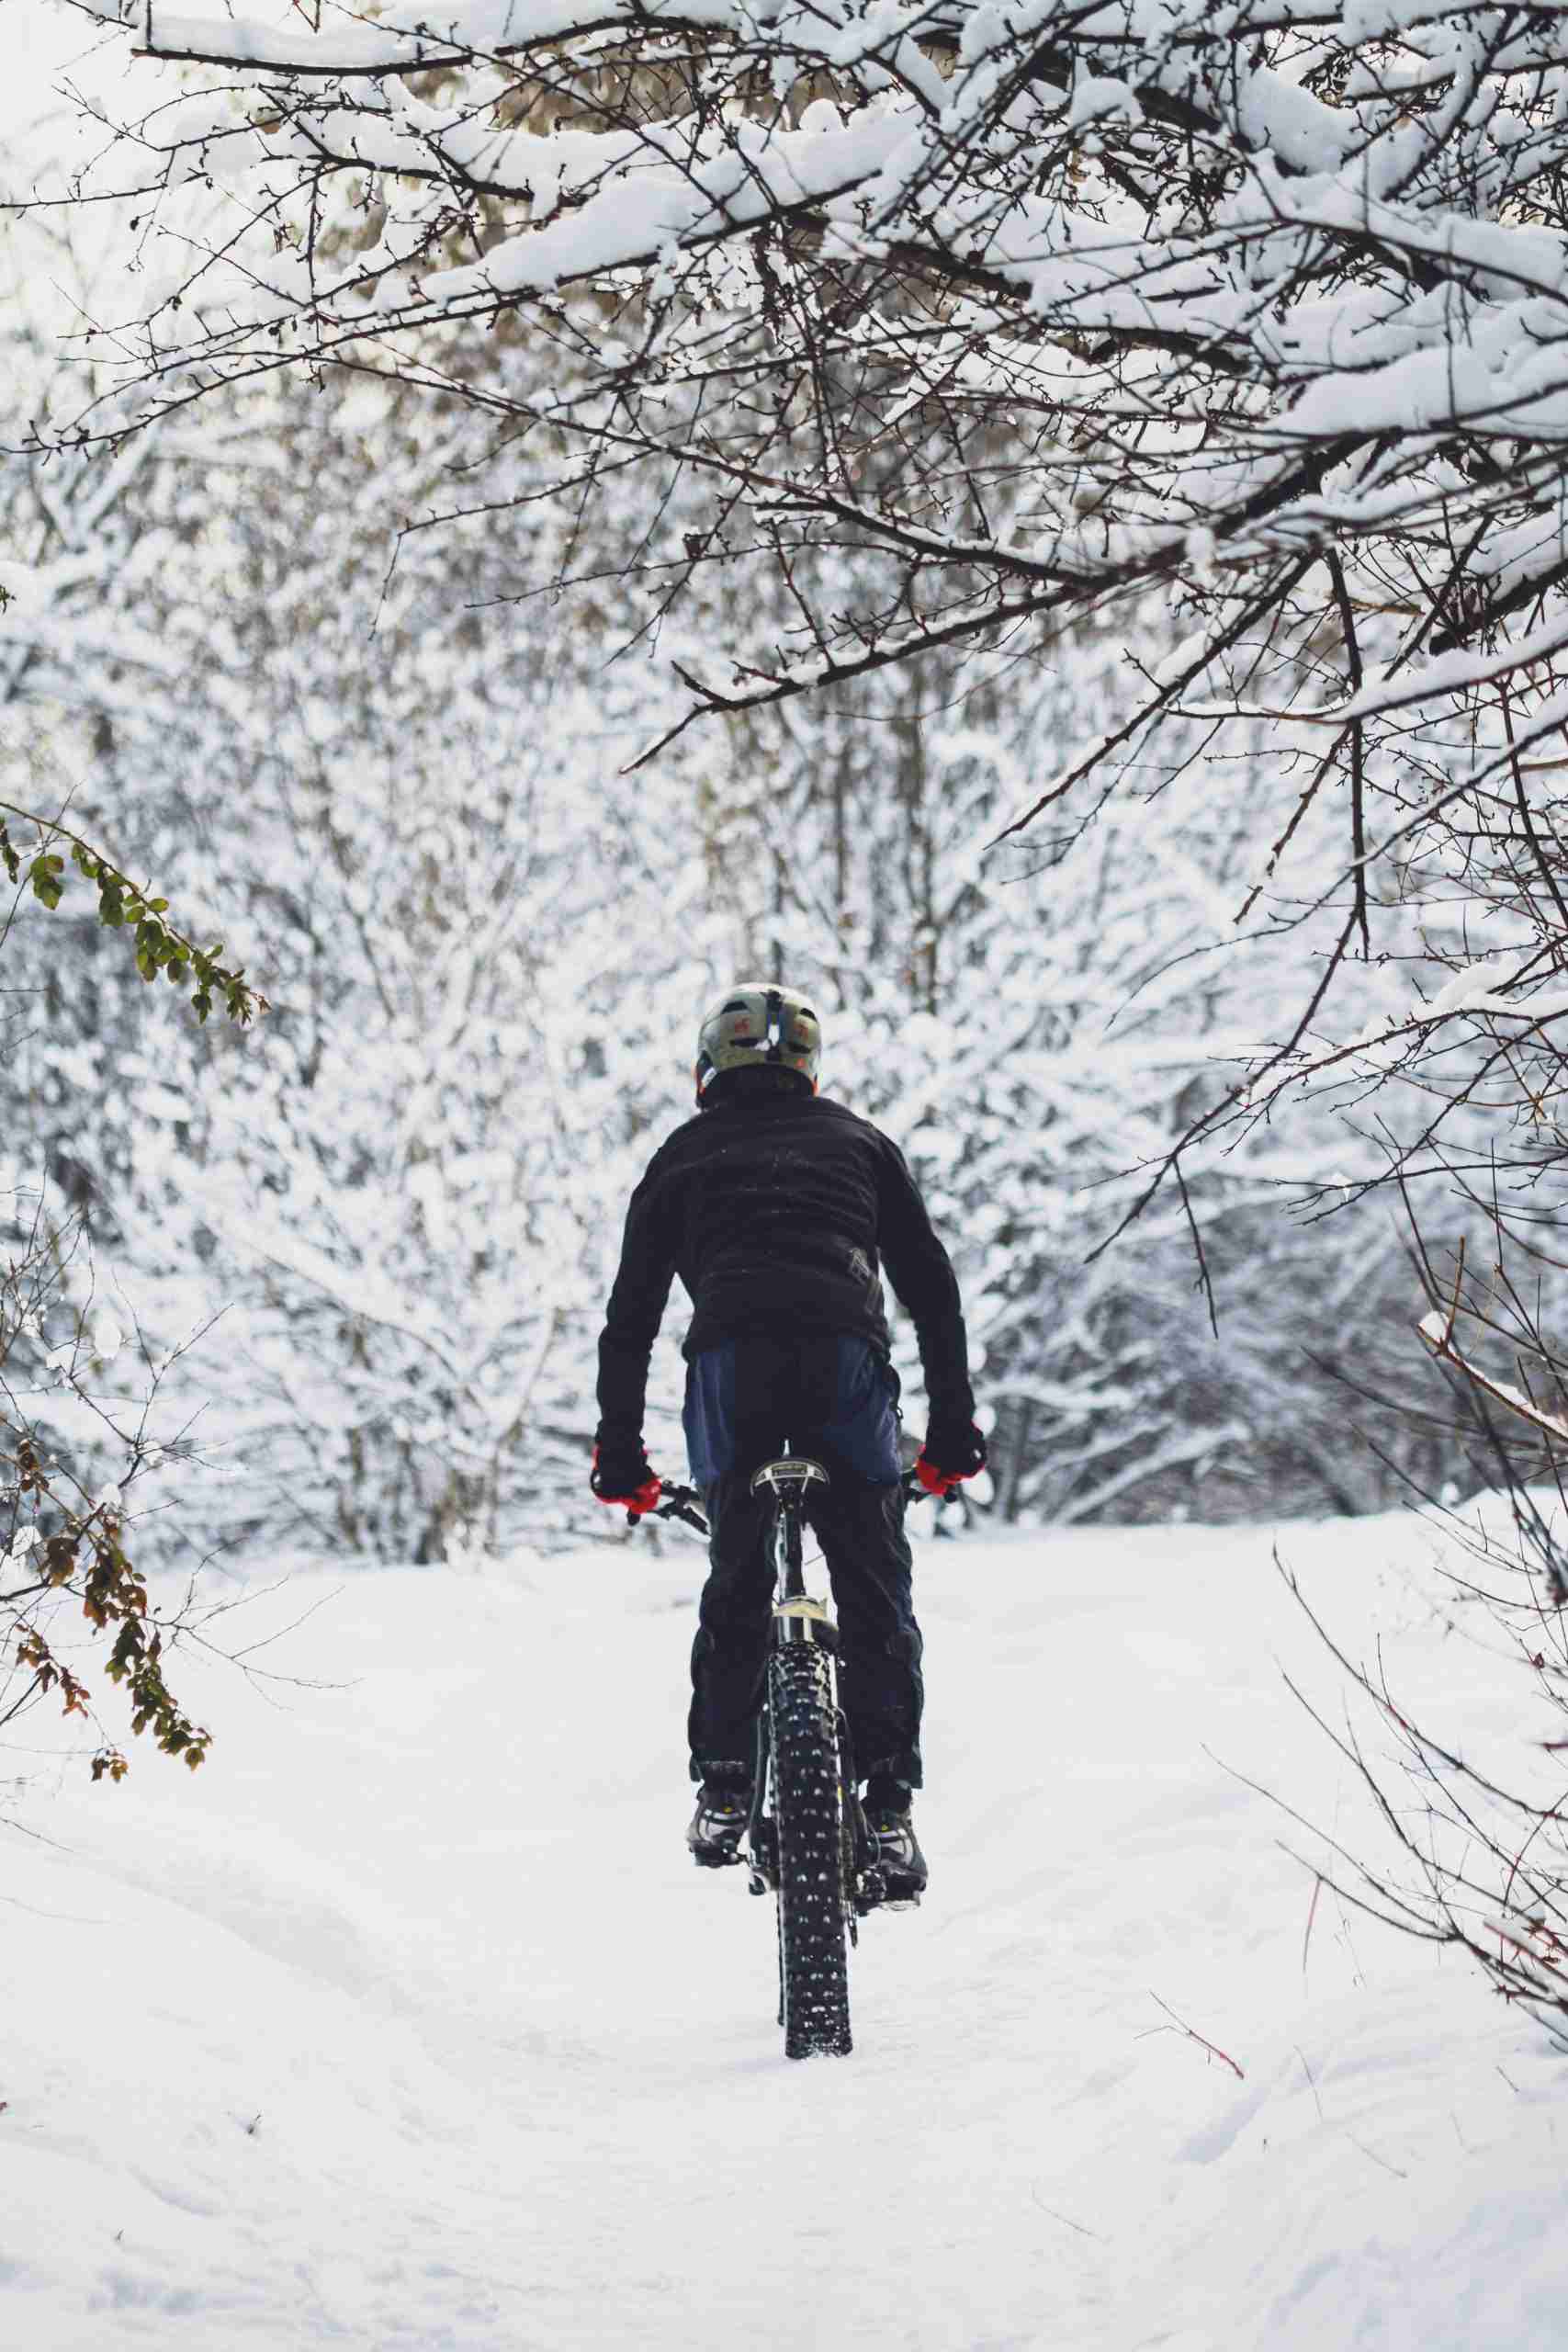 What Is Winter Fat Biking All About and Where Can You Do It?